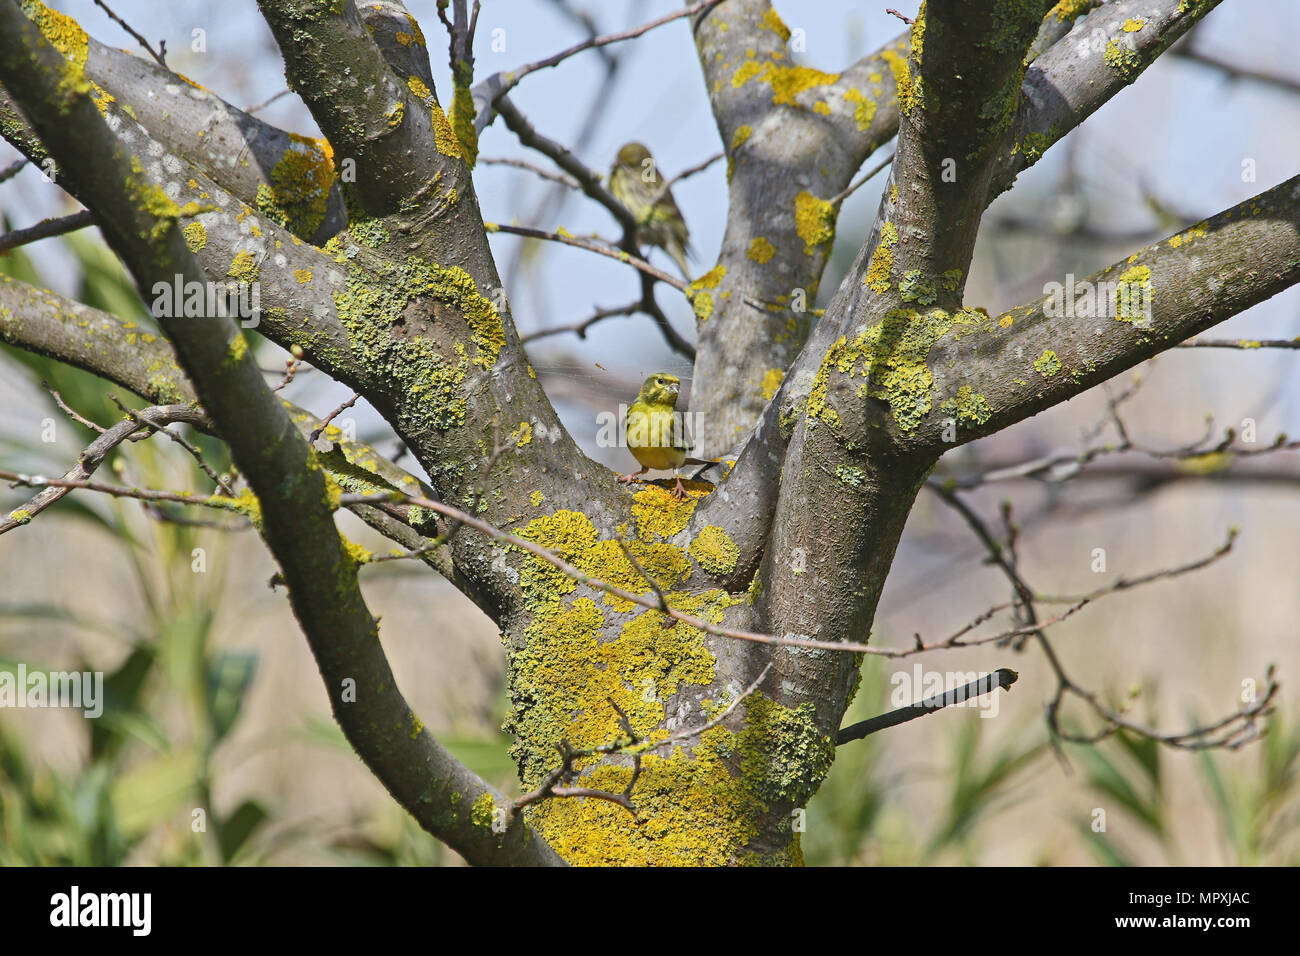 male serin bird Latin name serinus serinus eating insects from a spider web in a tree in spring in central Italy with a female serin behind him Stock Photo